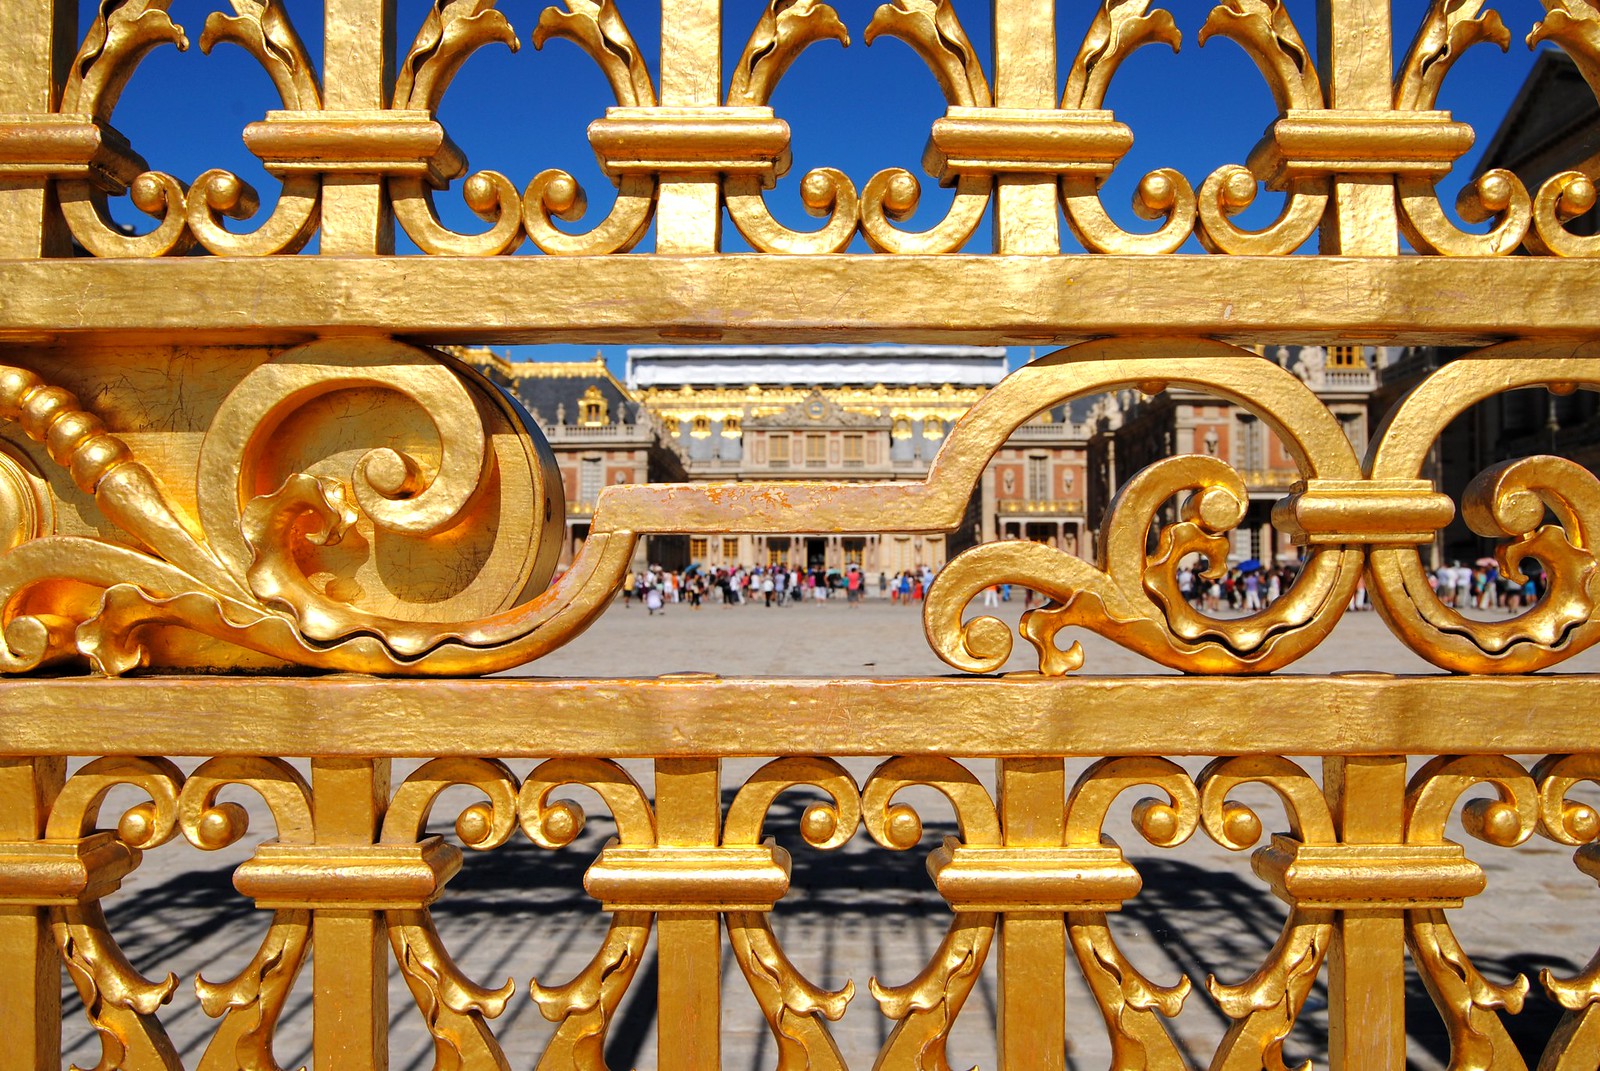 The golden gate in front of the Chateau de Versailles